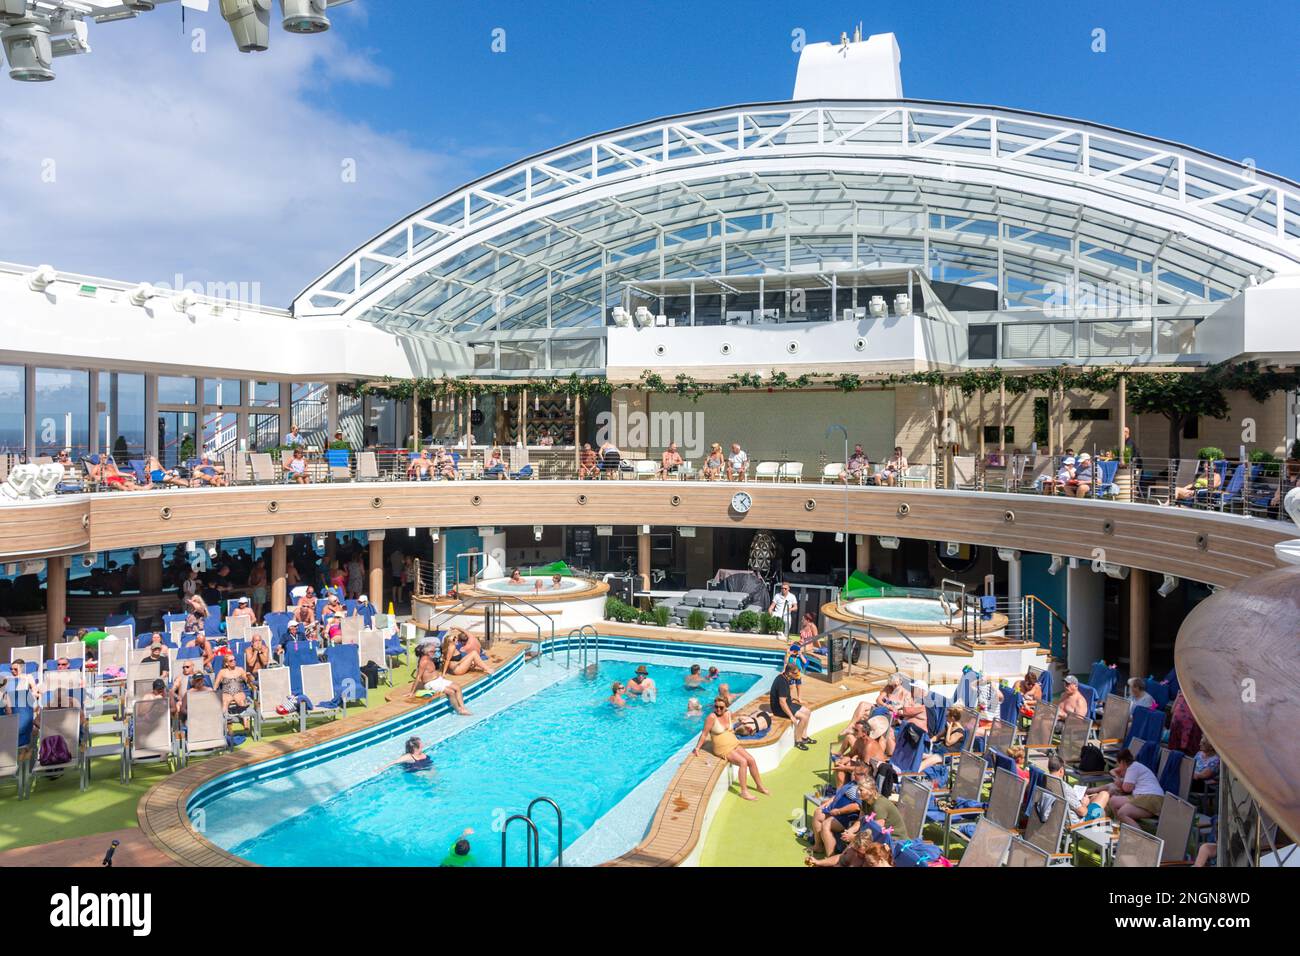 Skydome with open retractable roof on P&O Arvia cruise ship, Lesser Antilles, Caribbean Stock Photo